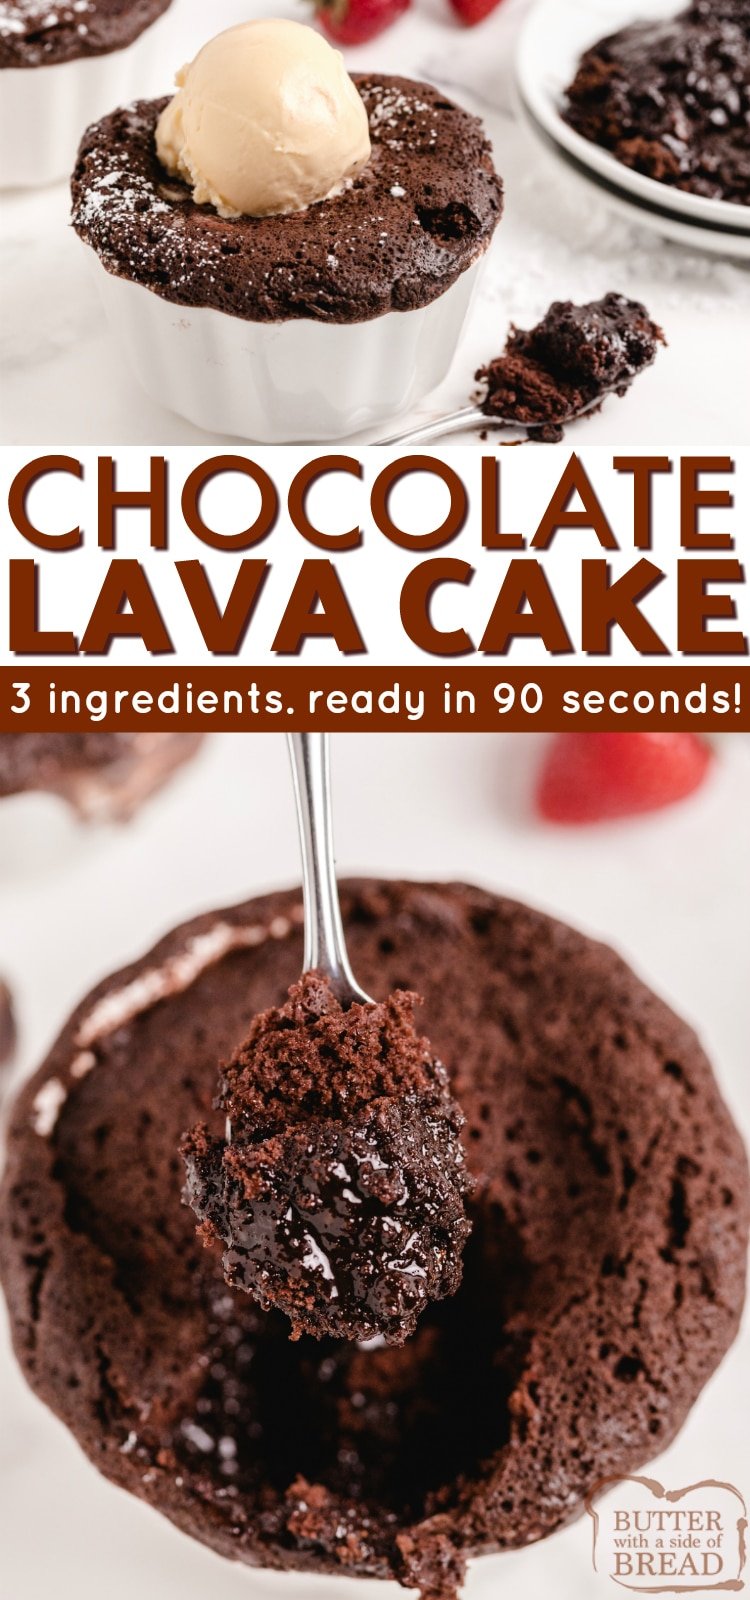 90 Second Chocolate Lava Cake is made with only 3 ingredients and in 3 minutes or less. This is the fastest chocolate mug cake recipe with a sensational molten lava fudge filling!